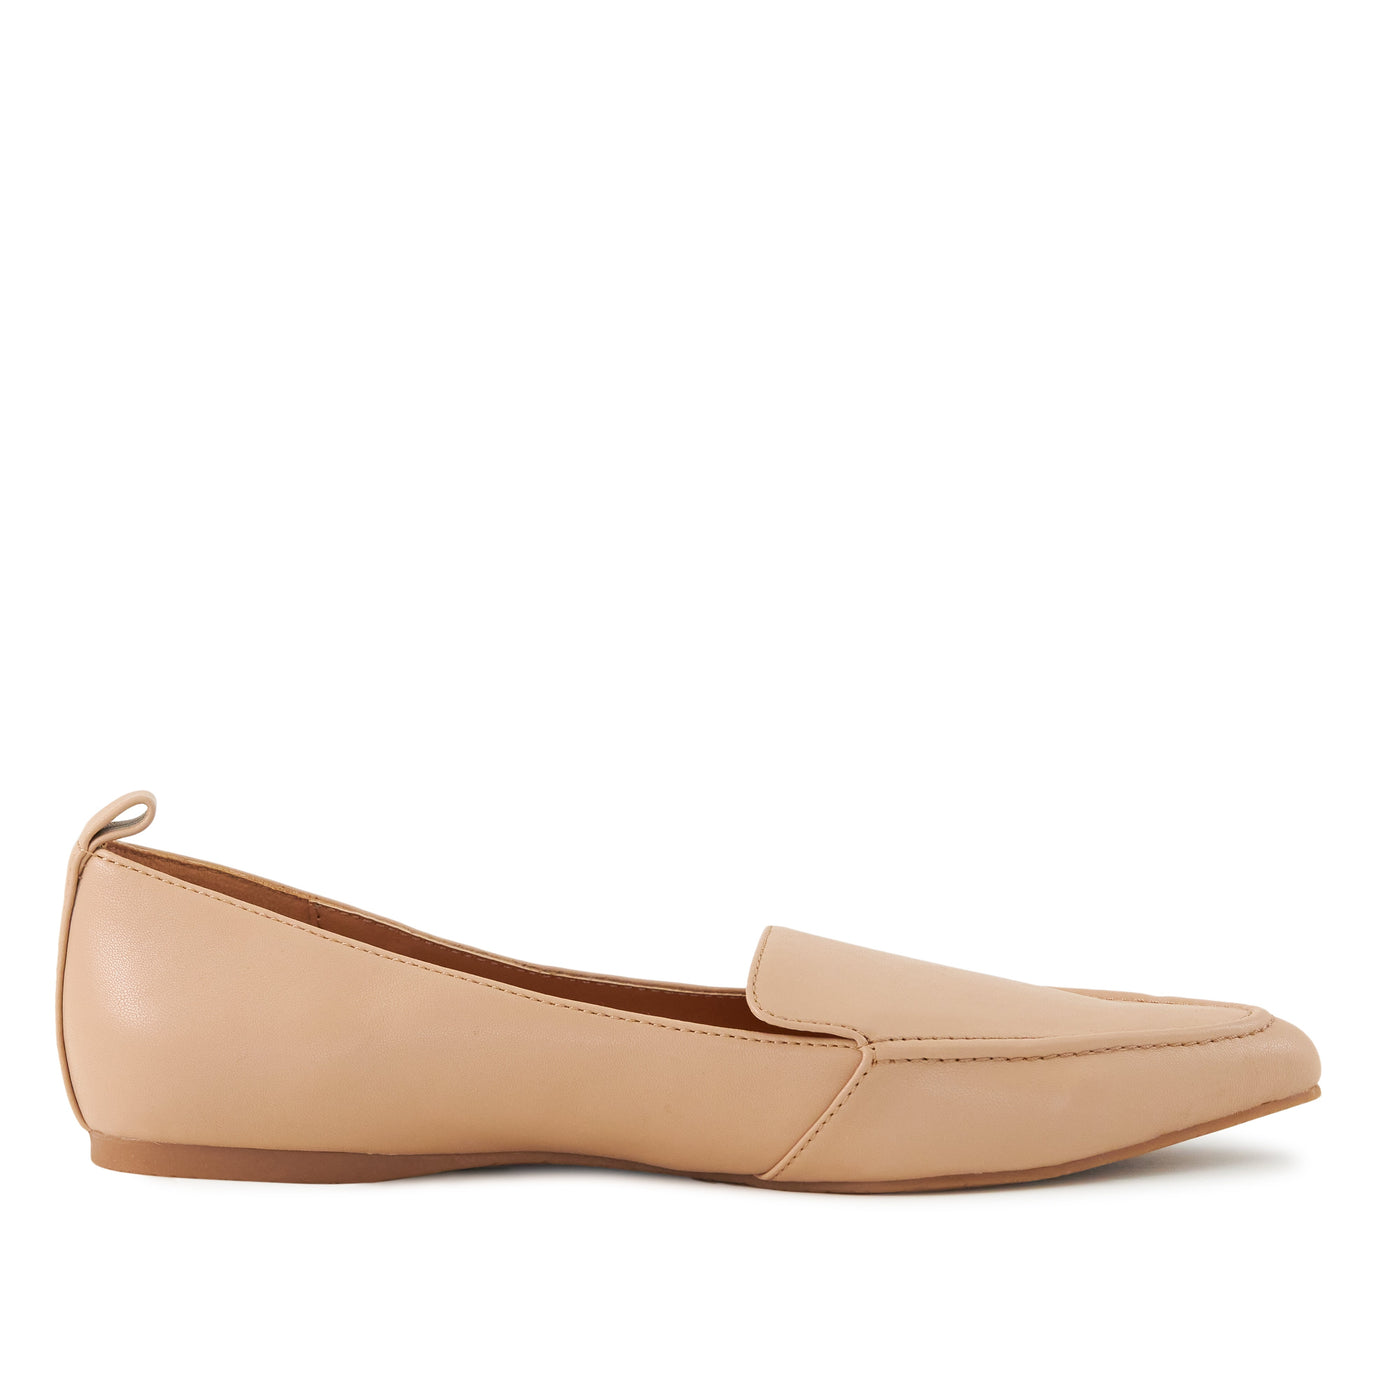 Women's Flat Socialite Natural by Nest Shoes